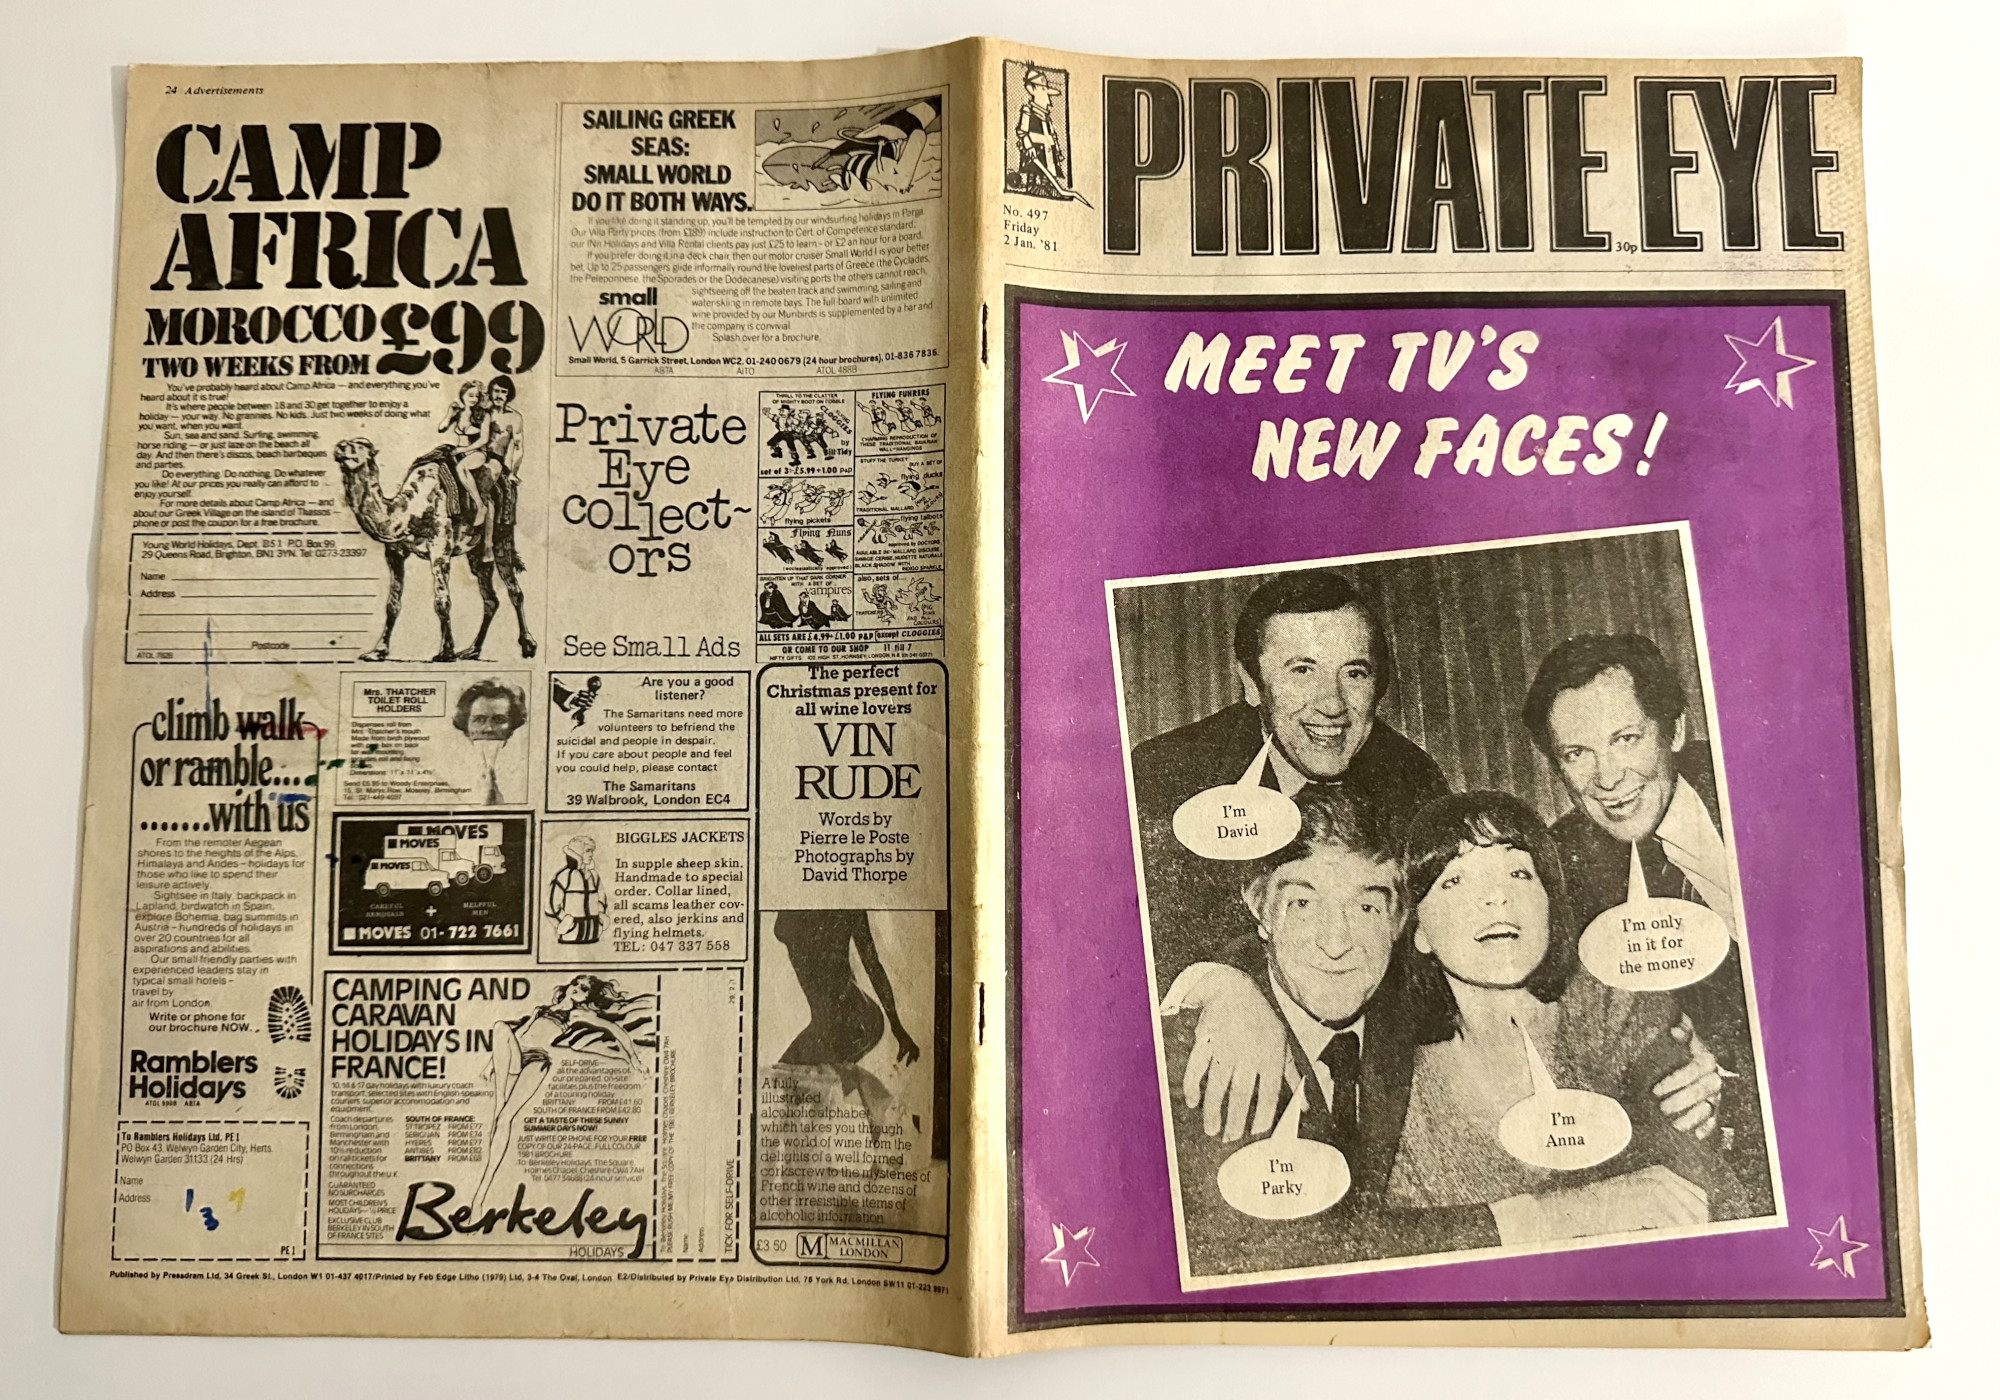 Actual issue of Private Eye, showing purple cover and CAMP AFRICA advert